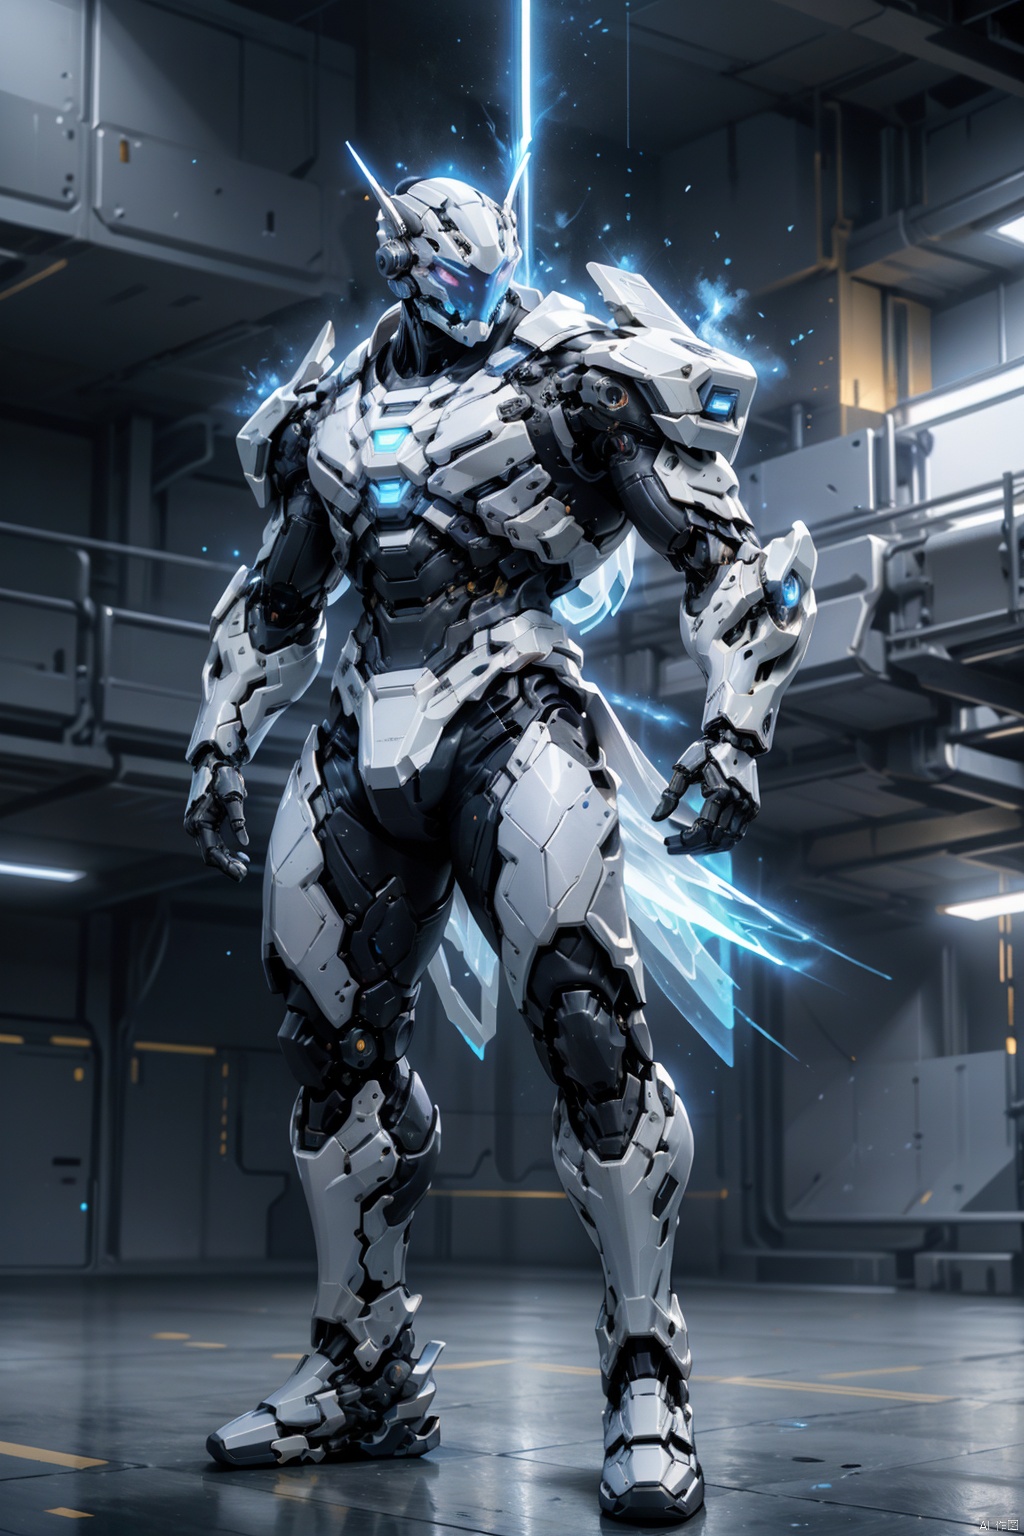  ((black line art)),ghost mask, dynamic posture, Cybernetics warrior armor, mechanical arm, science fiction, shiny armor, future science fiction style, fighting posture, fighting style, negative space, dynamic lighting, clear lines, high contrast, absurdity, best quality, negative space, urban background, perfect composition, light and shade contrast composition,Mecha,machinery,rex,Cursed left arm,full_body,fighting,fire bomber,bluebloomers,colored_skin,fairy,skin,Colorfulportraits,long,sssr,